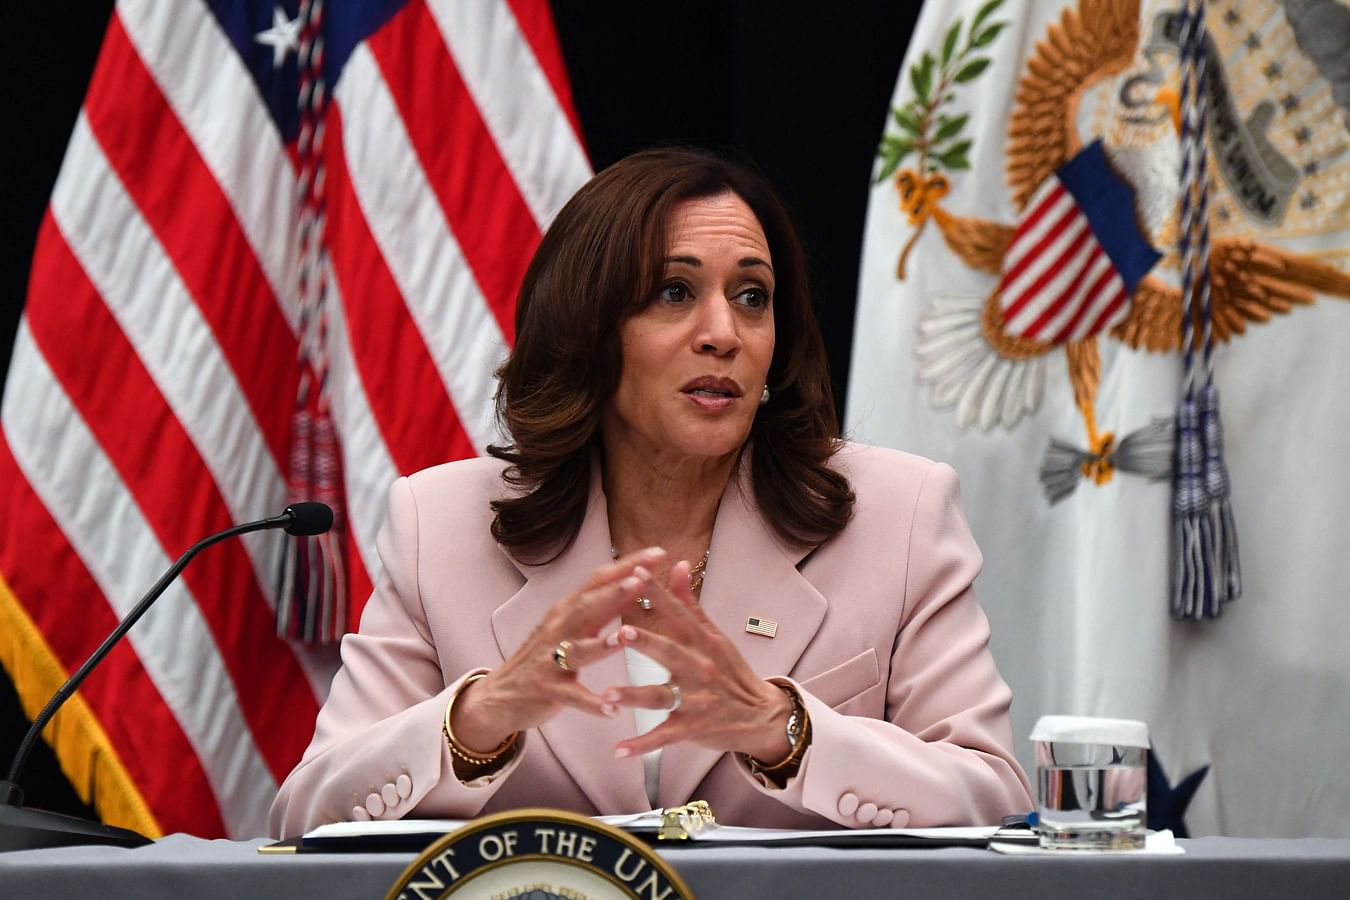 US Vice President Kamala Harris speaks during a roundtable with business executives at the IV CEO Summit of the Americas on the sidelines of the IX Summit of the Americas in Los Angeles, California on 7 June, 2022